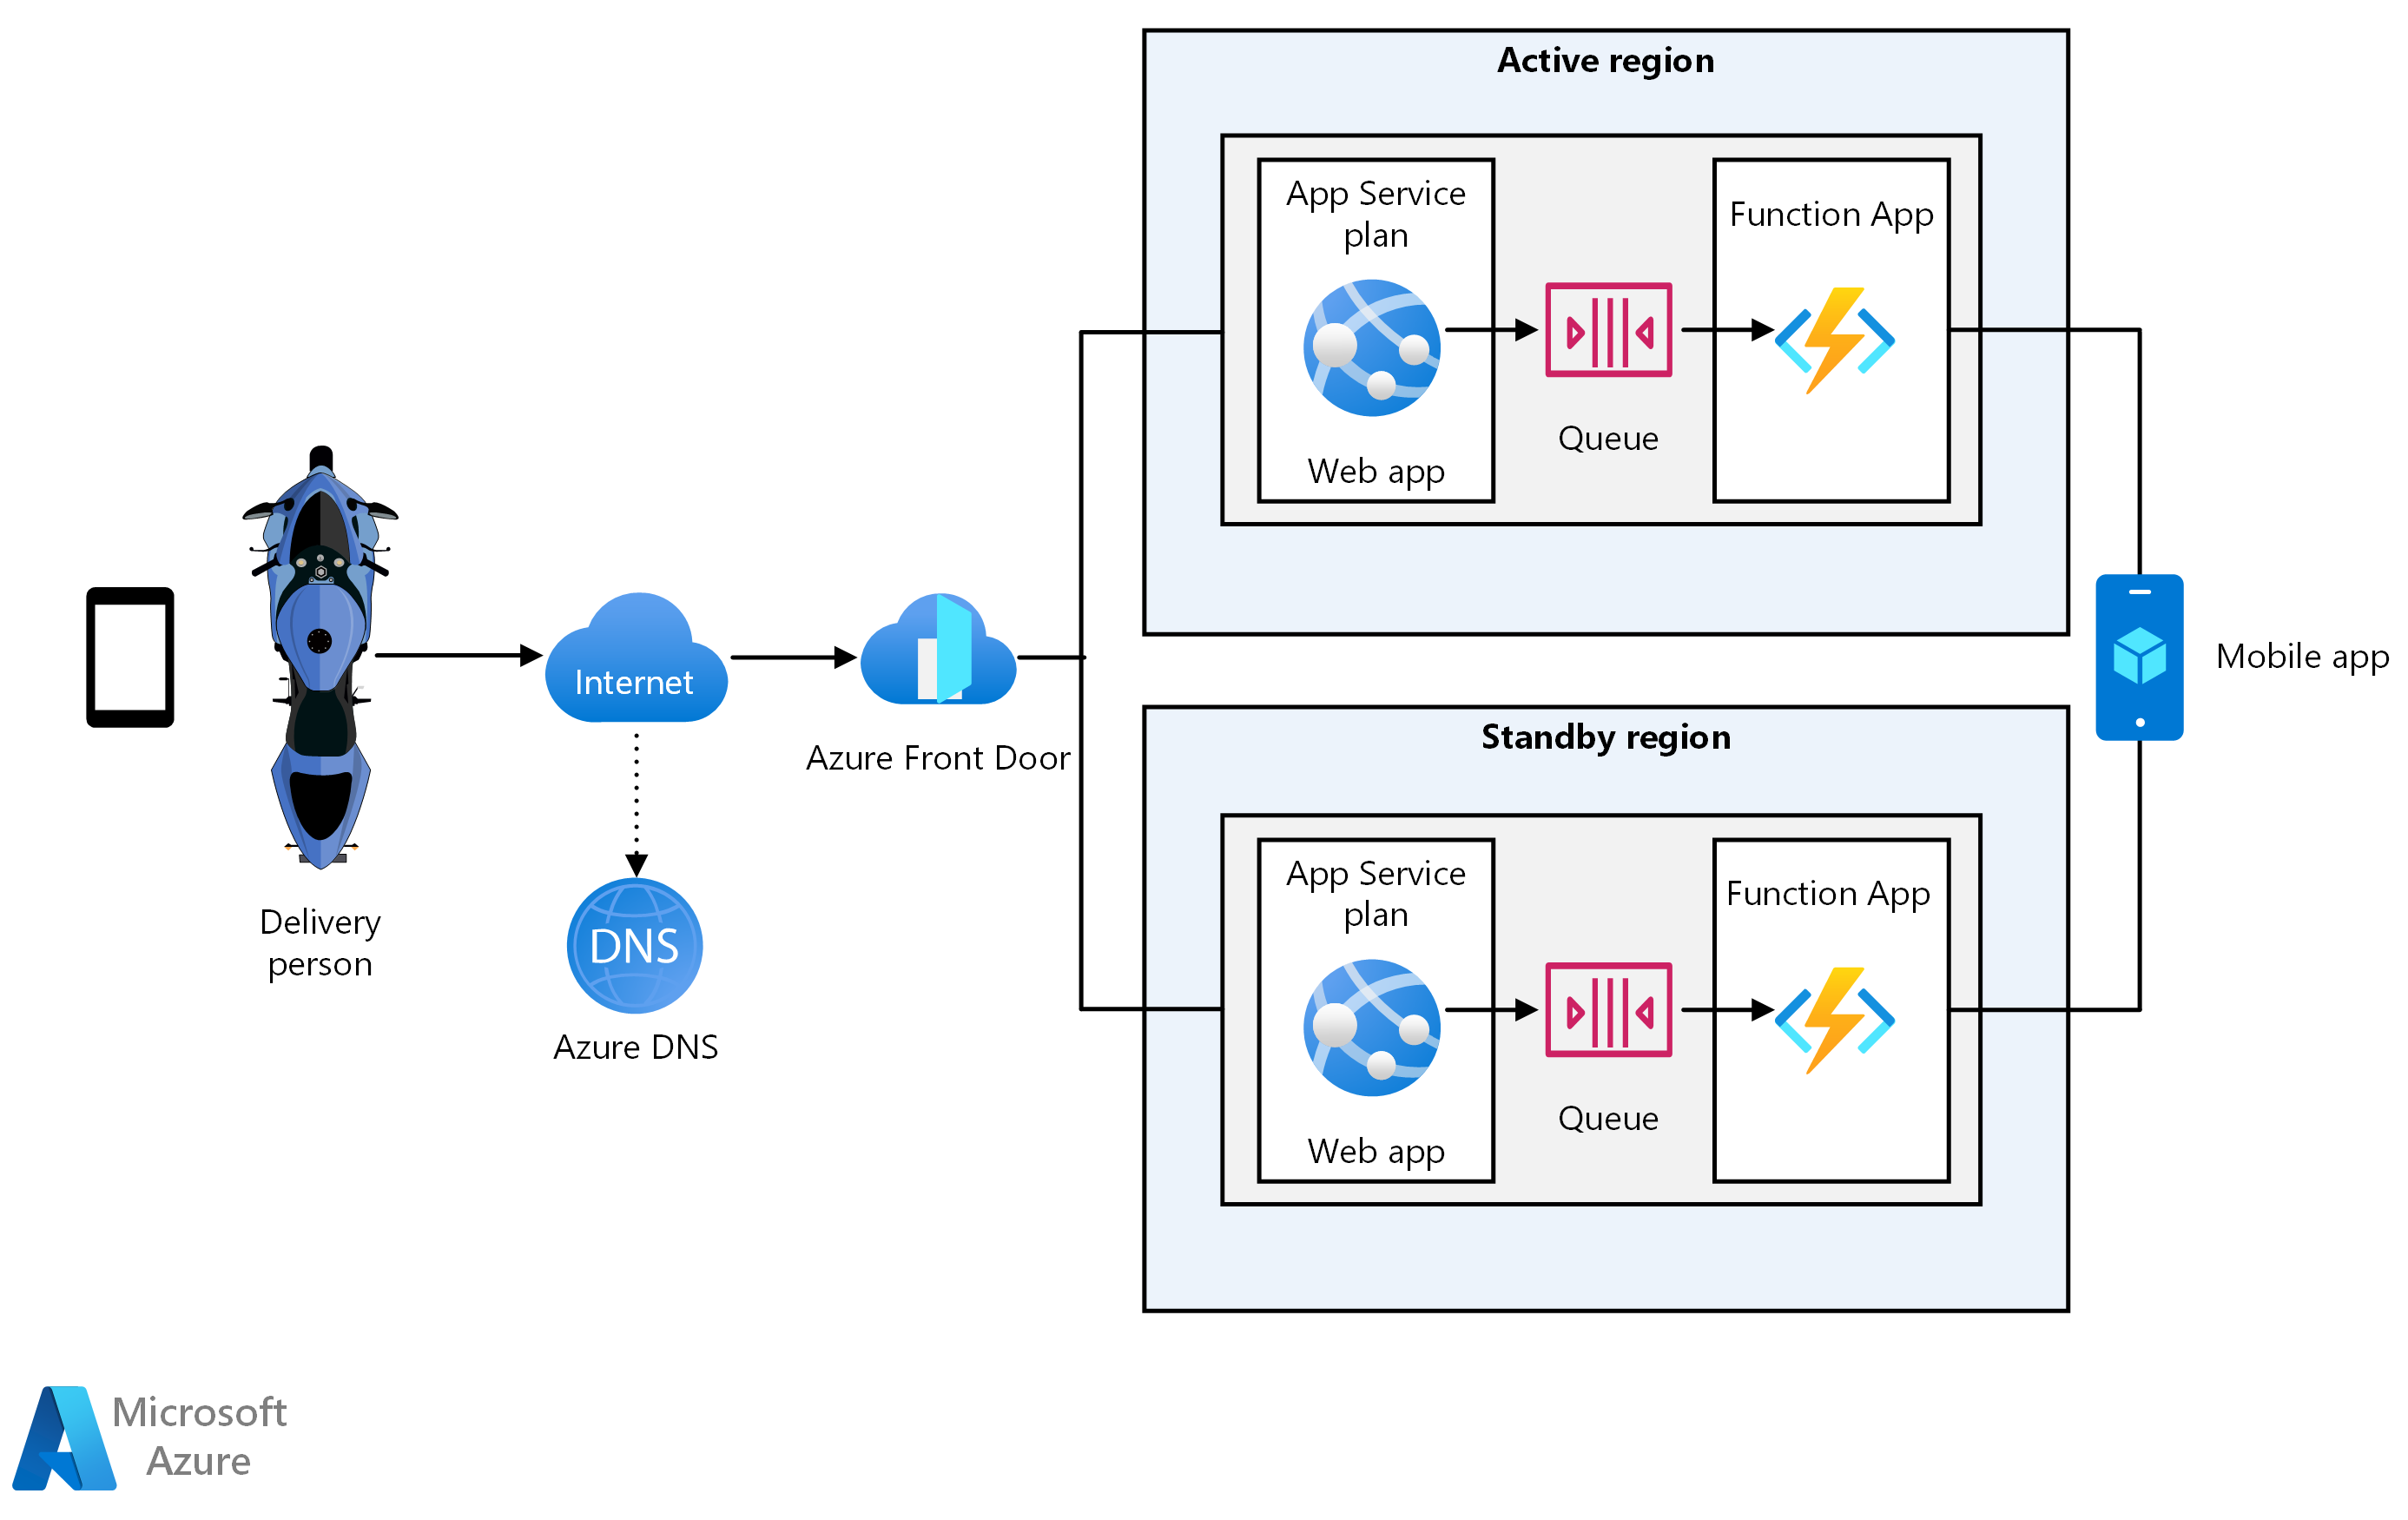 Architectural diagram showing how Azure Front Page works to provide high availability for a mobile app.